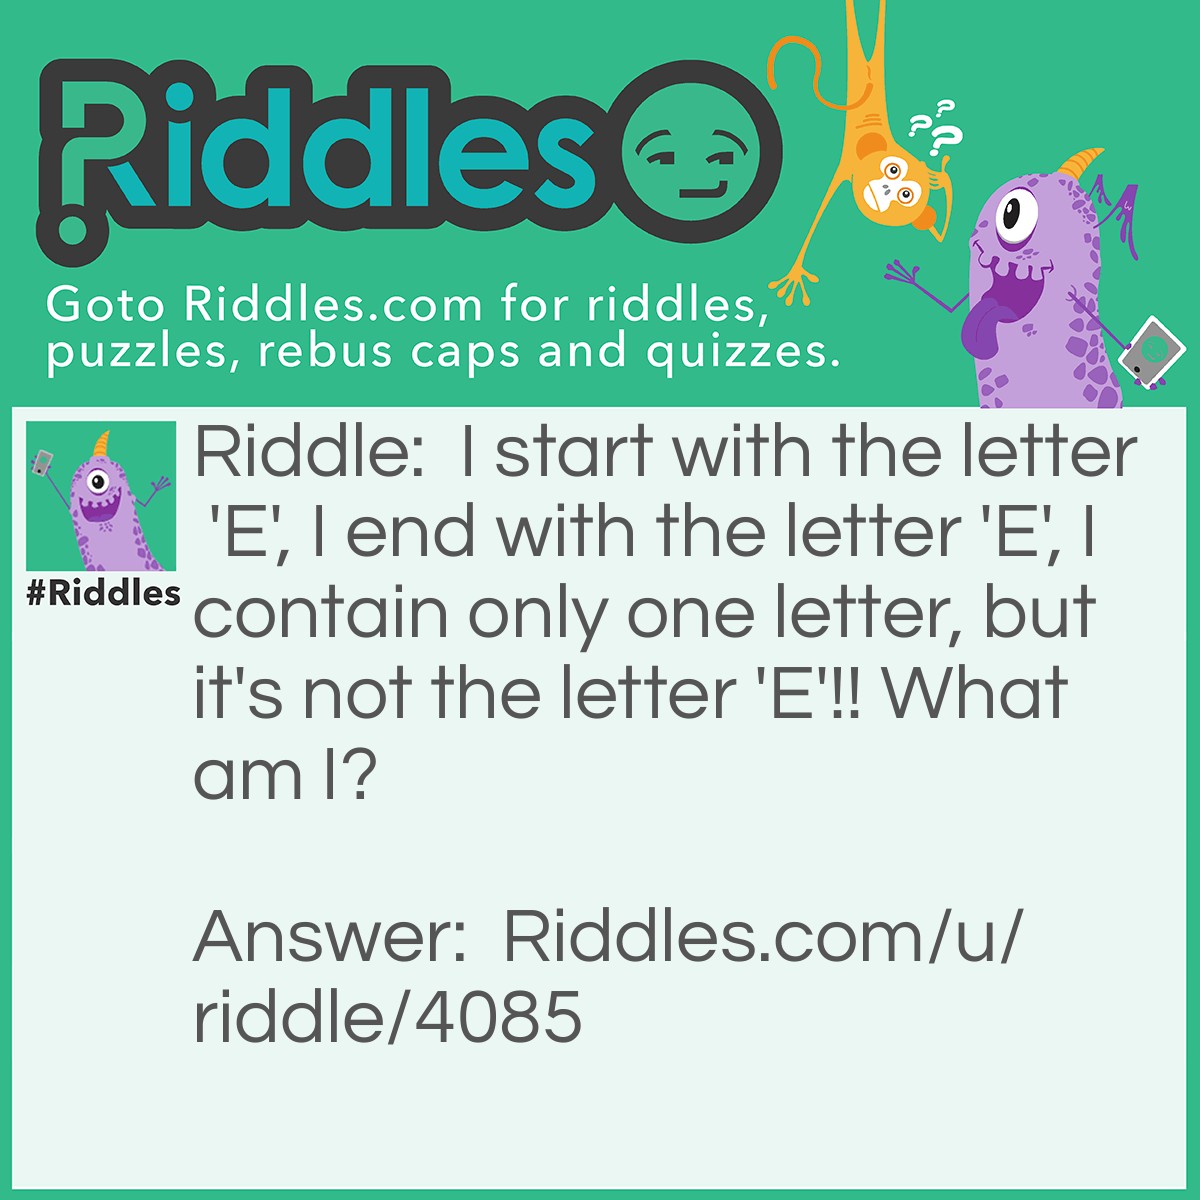 Riddle: I start with the letter 'E', I end with the letter 'E', I contain only one letter, but it's not the letter 'E'!! What am I? Answer: Envelope.